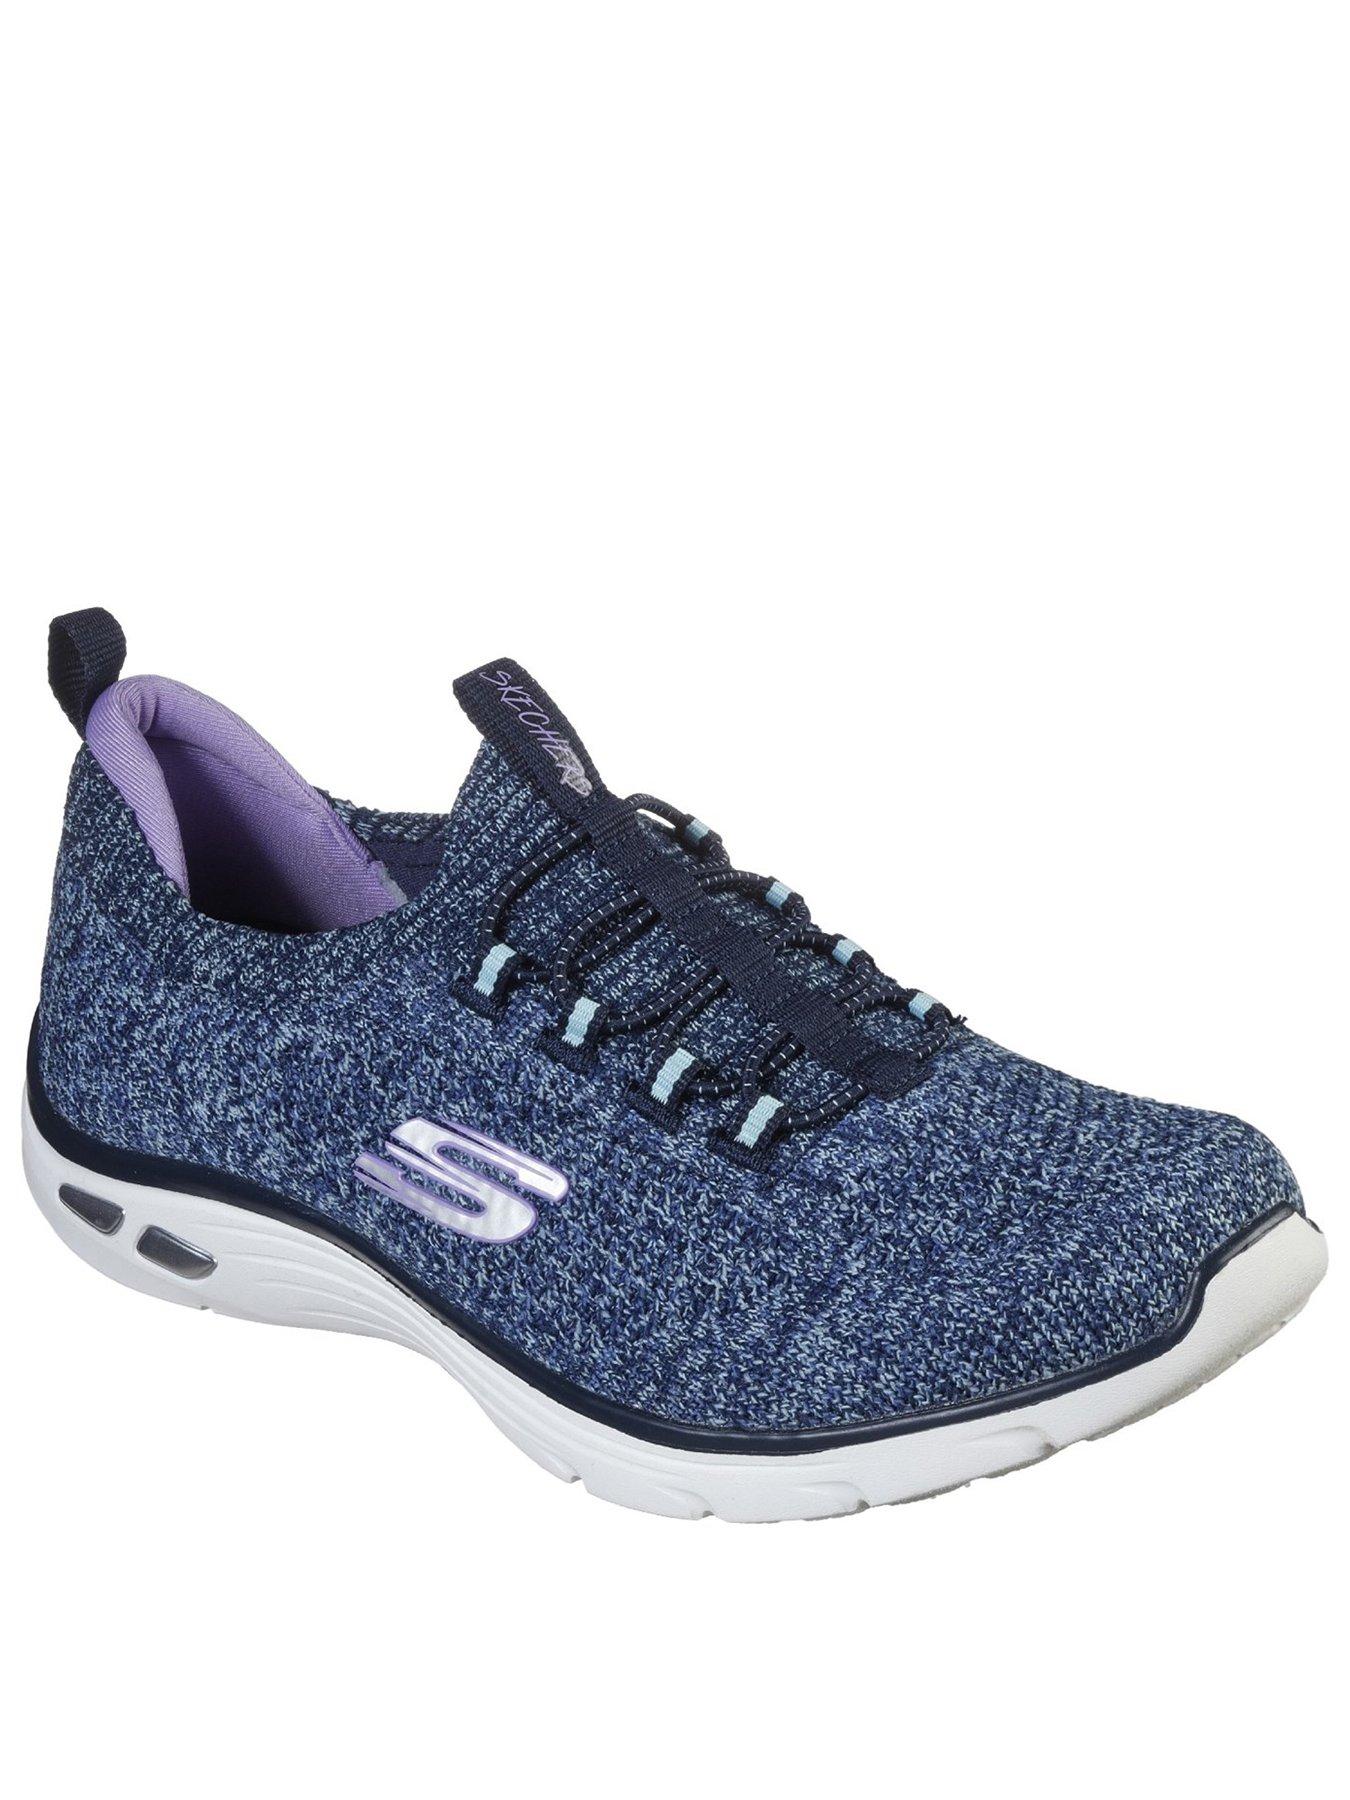 Skechers Empire D'Lux Trainers - Navy 